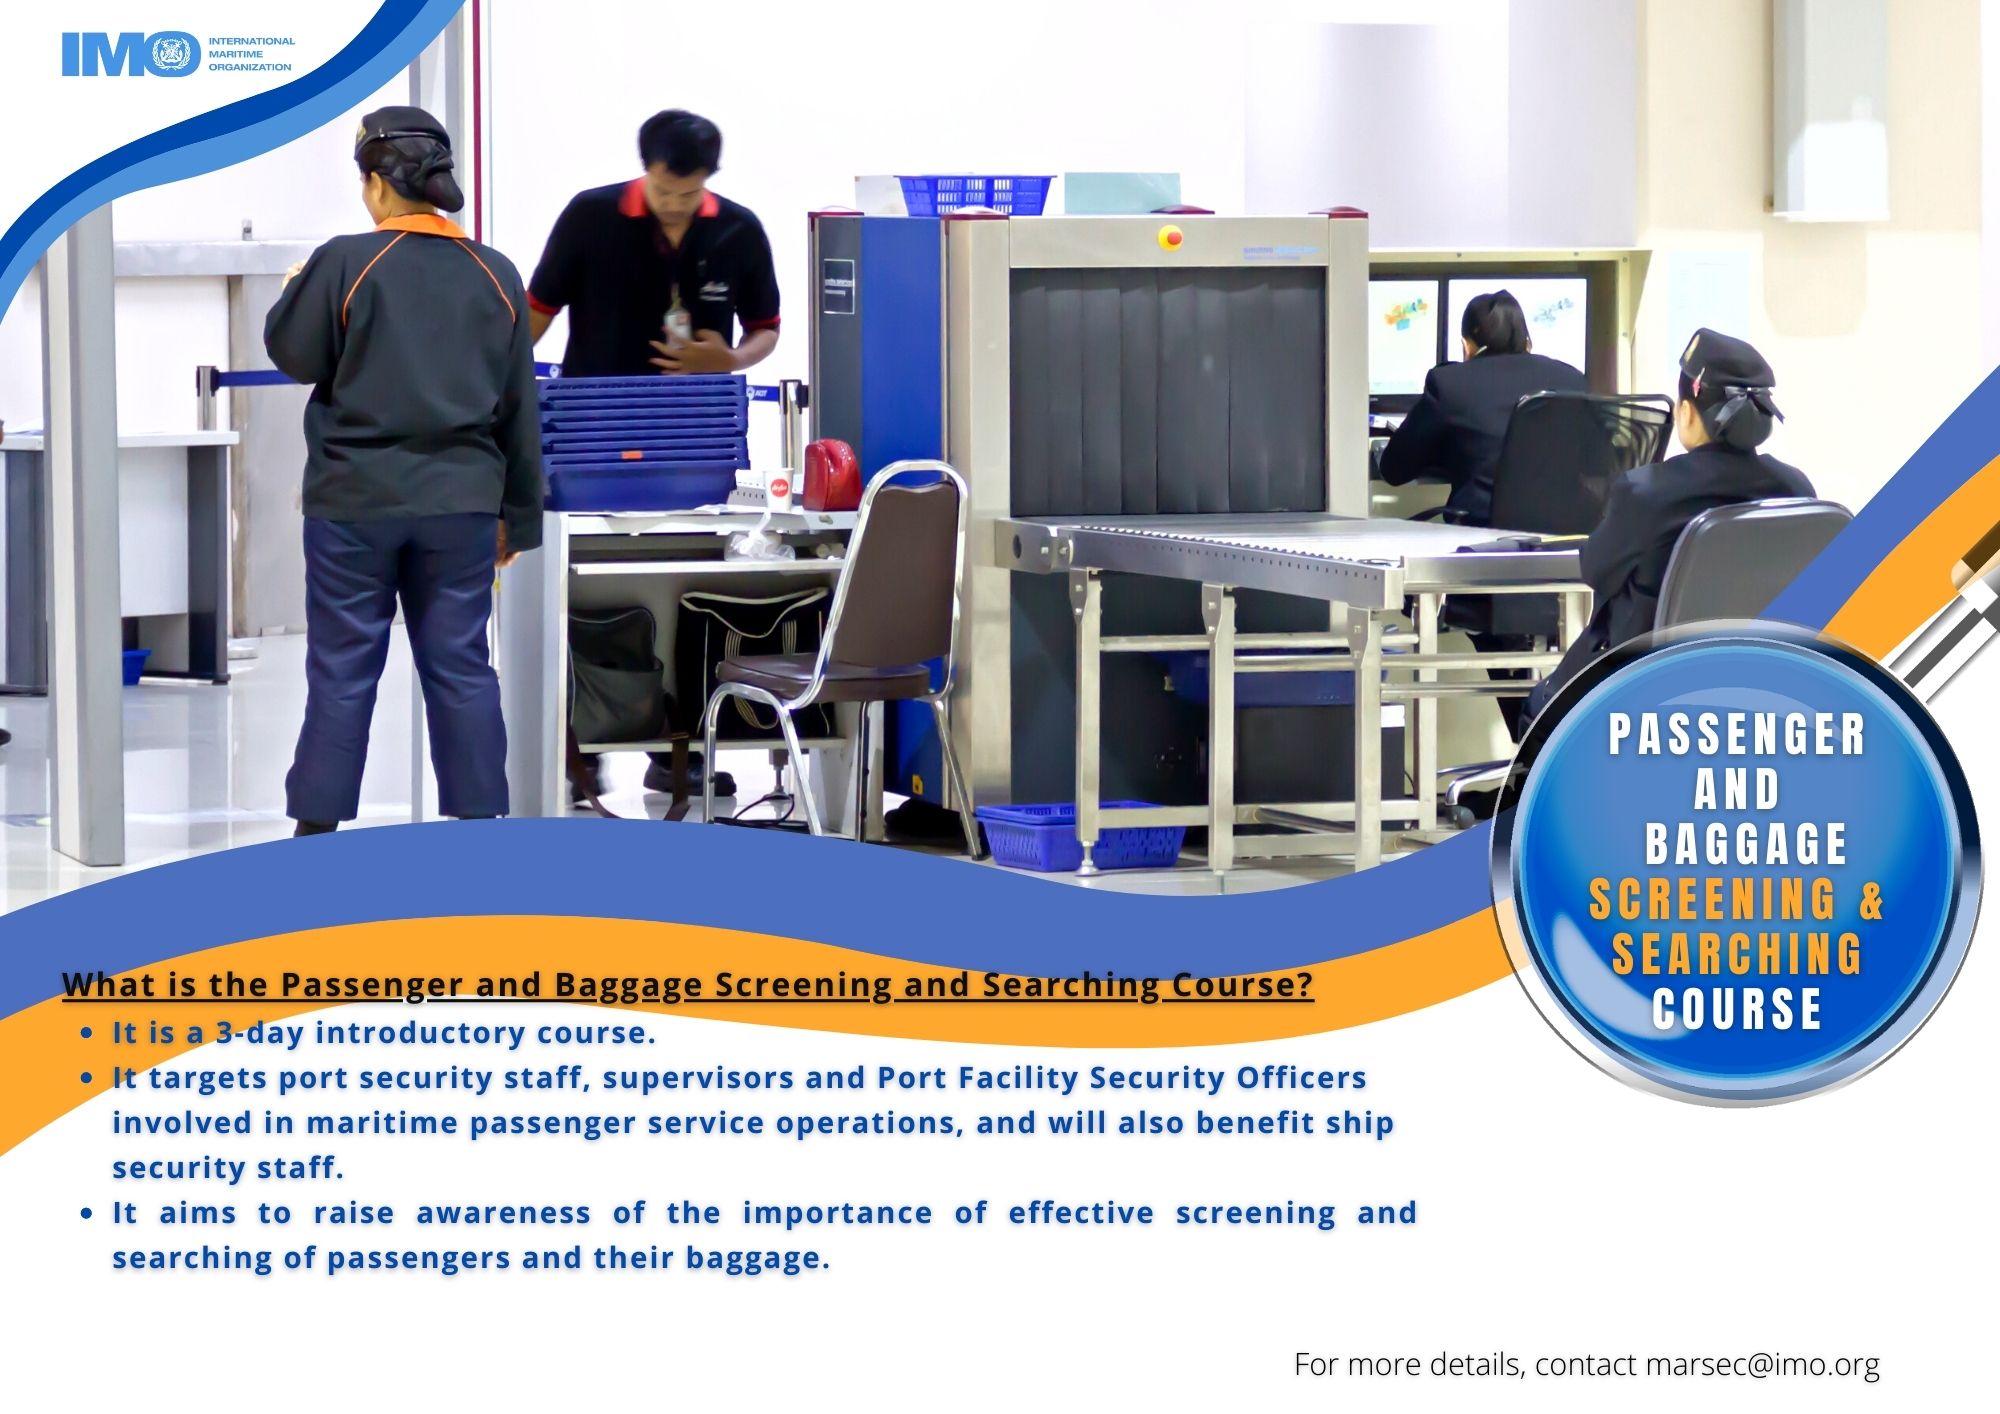 Regional Pax and Baggage Screening and Searching Workshop